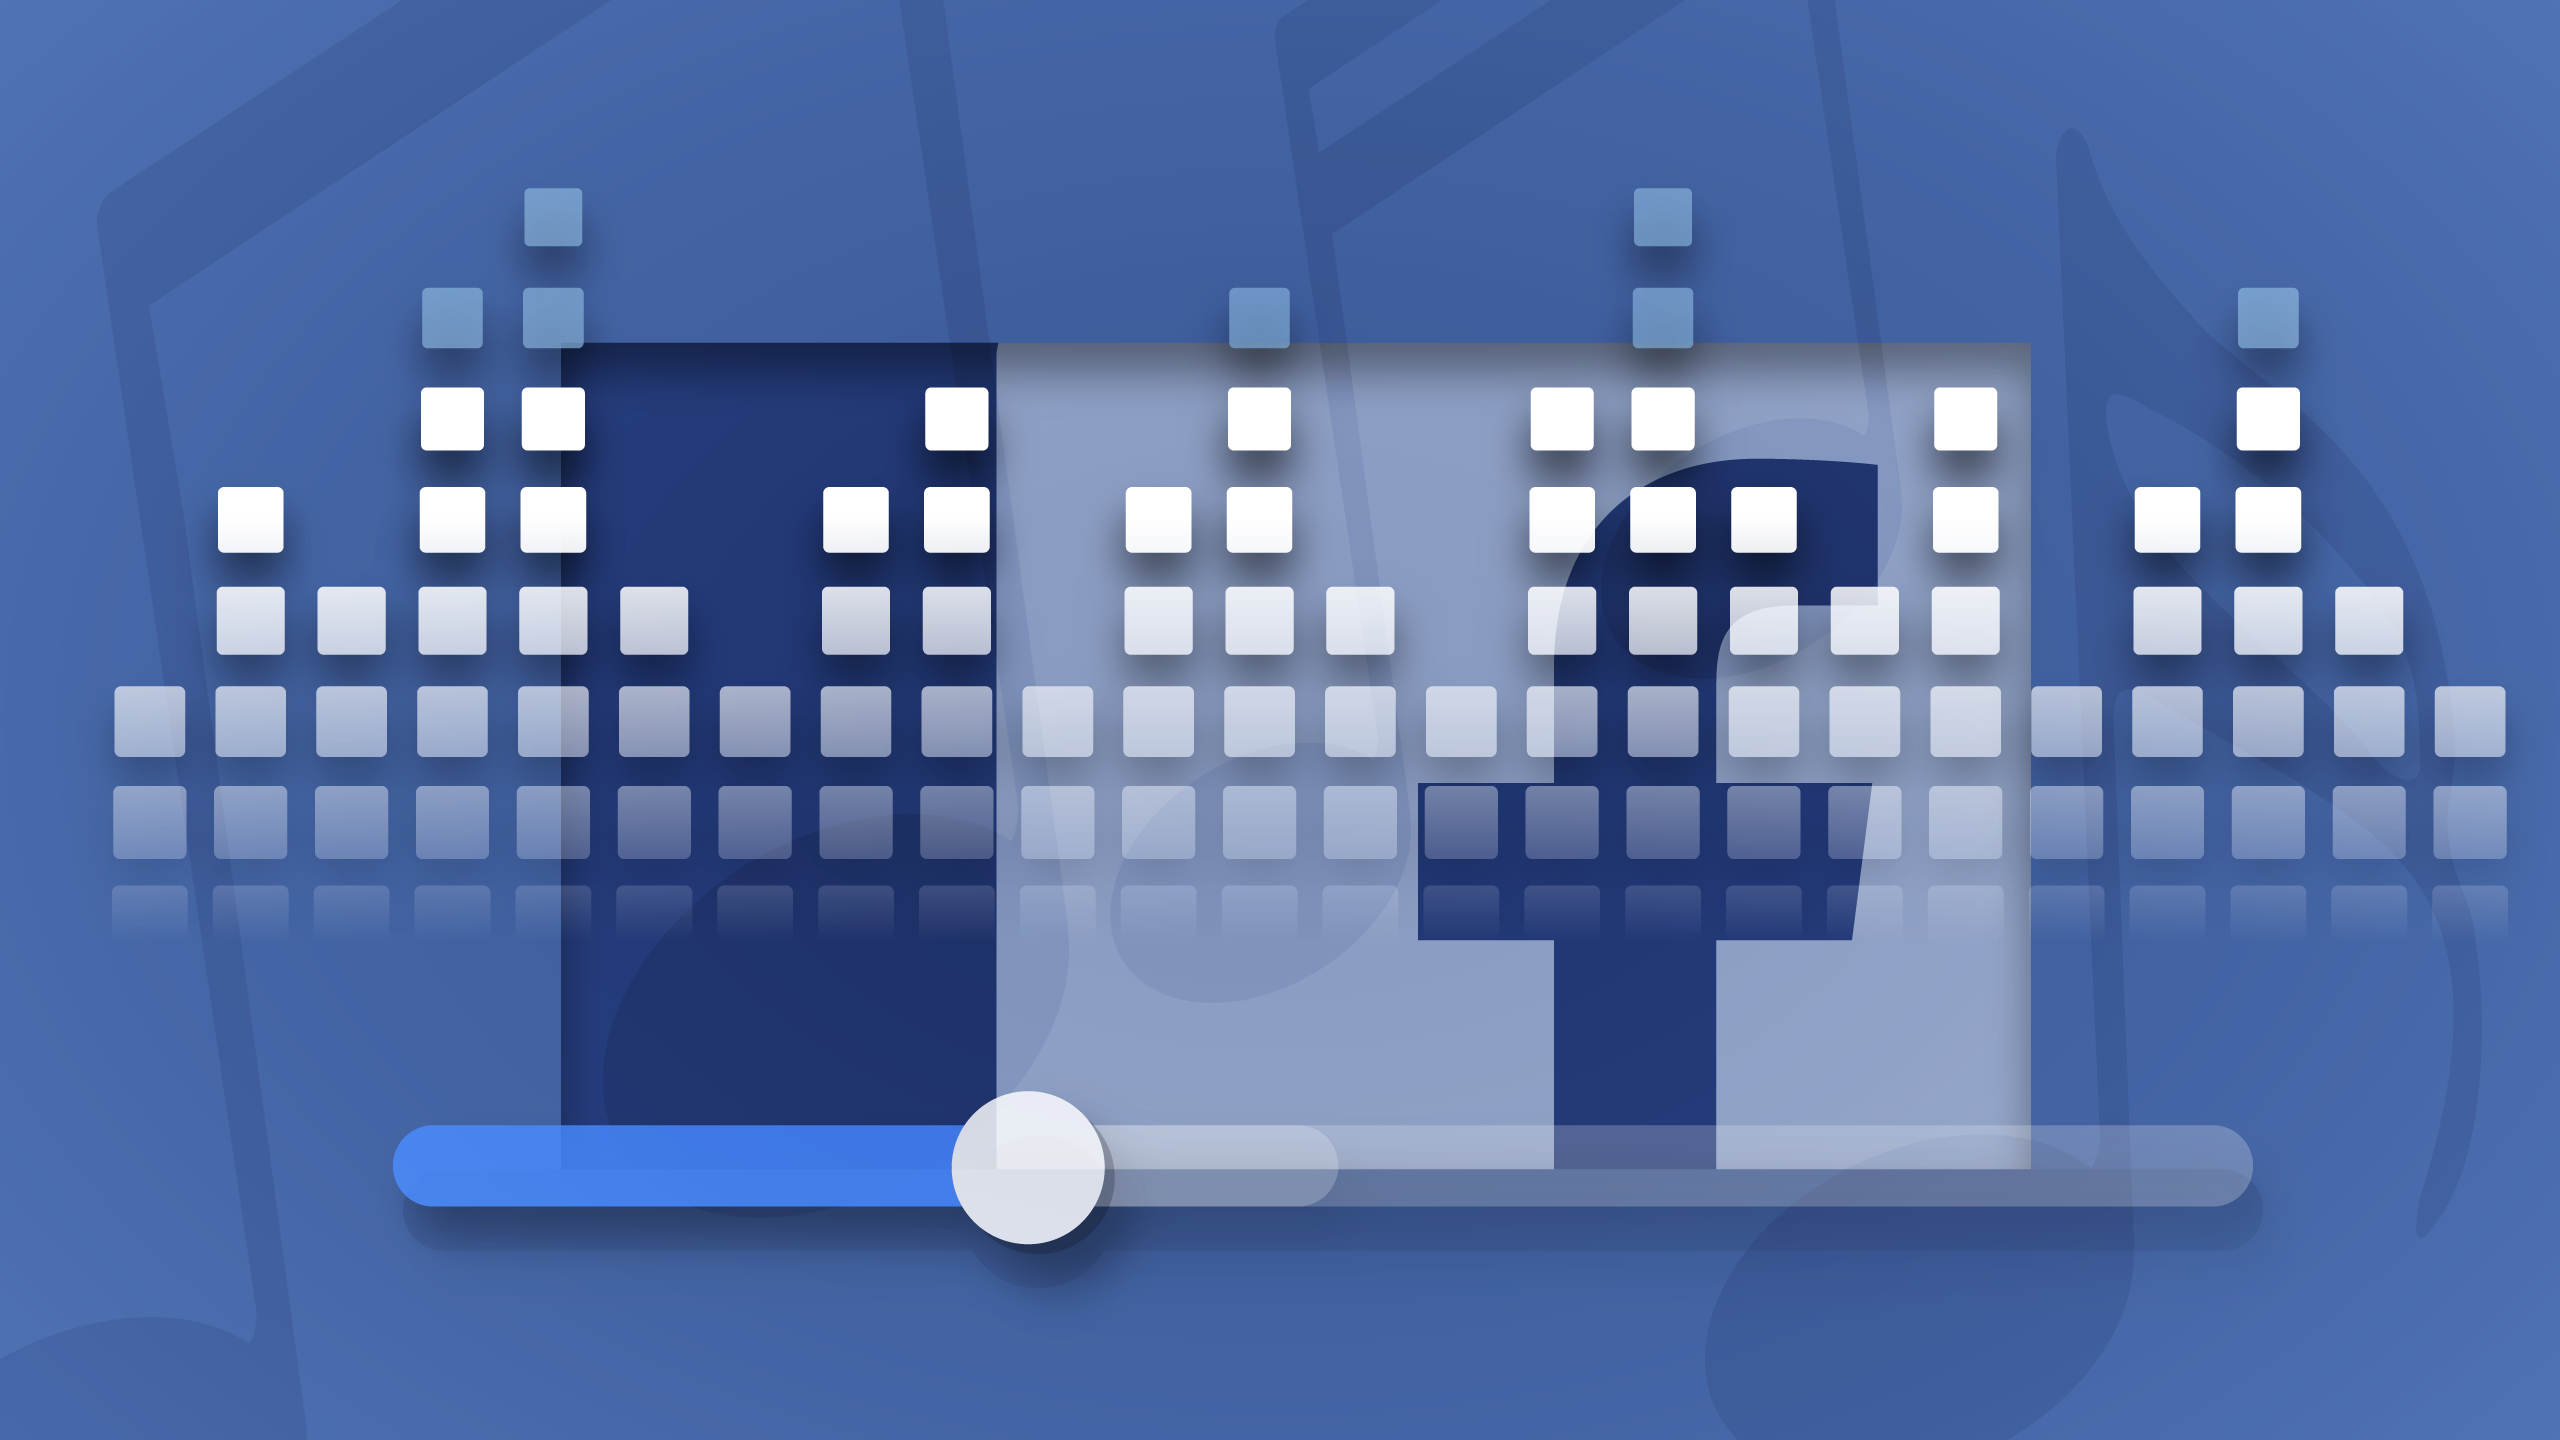 Facebook Sound Collection lets you add no-name music to videos